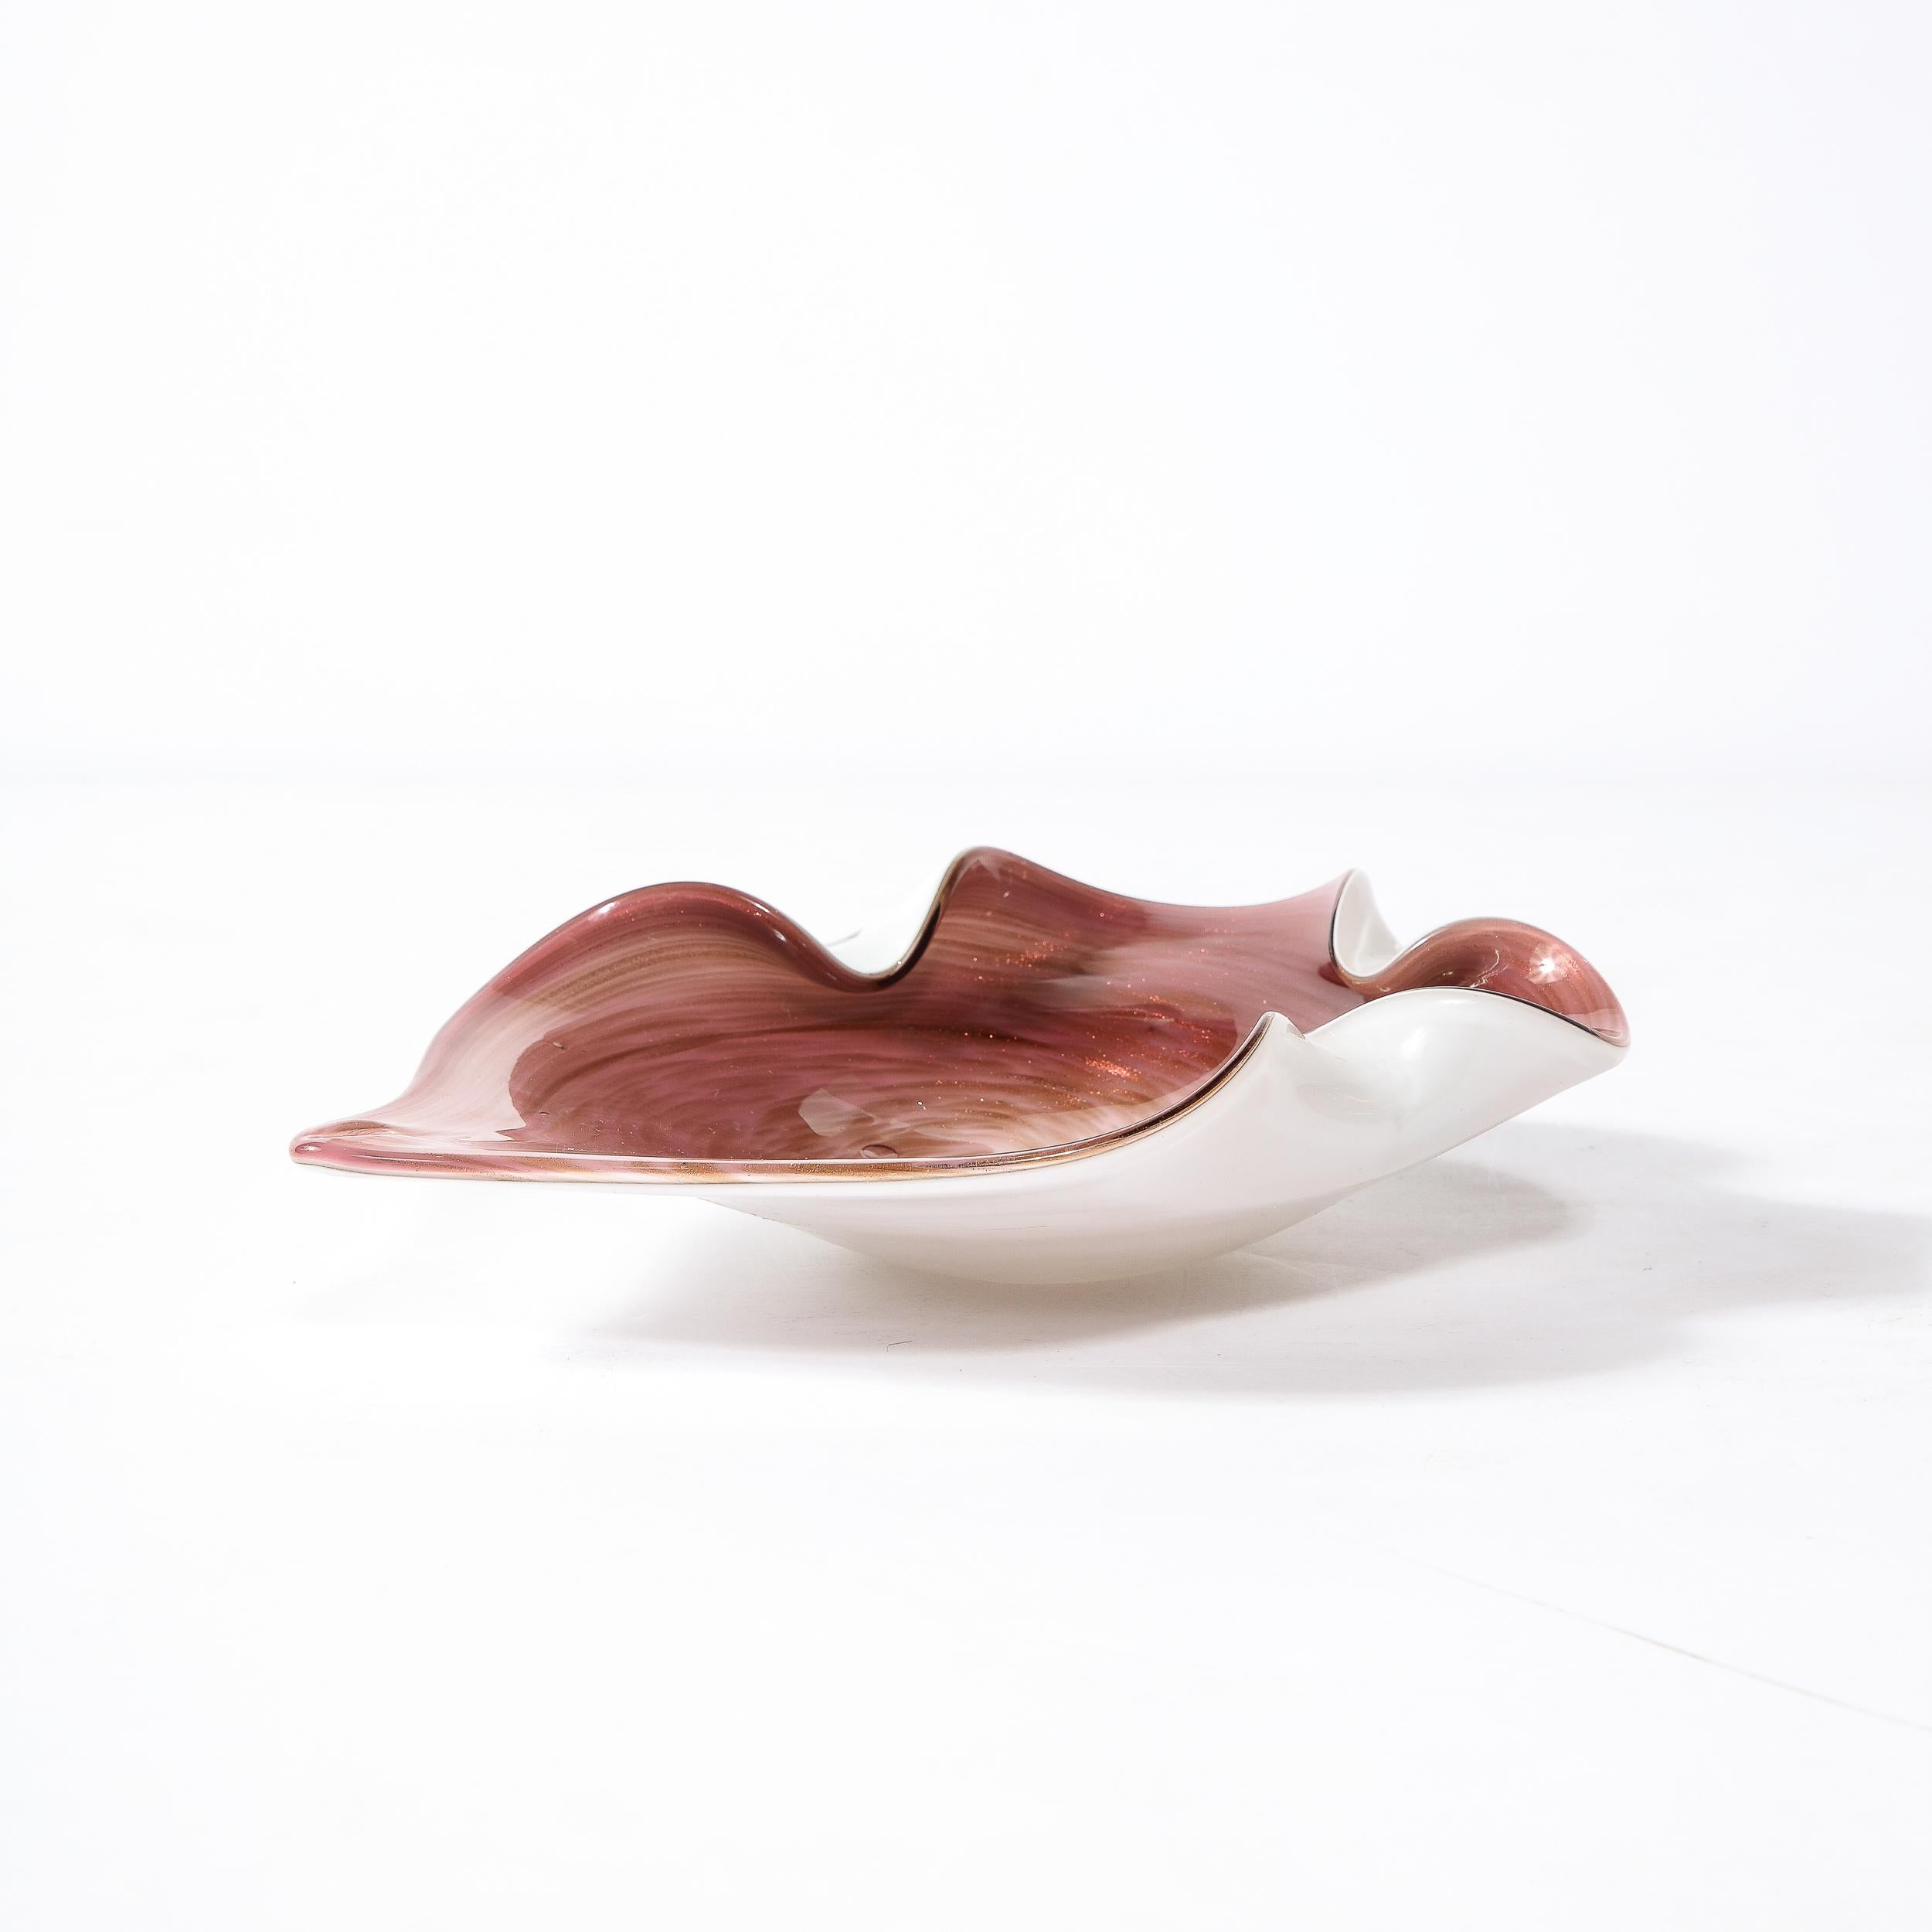 A stunning Hand-Blown Murano Glass Dish originates from Italy Circa 1960, rendered in a stunning amethyst hued glass, spun to meld with the undersurface hue in pearl white crimped detailing on three edges with one extended like a flower in the midst